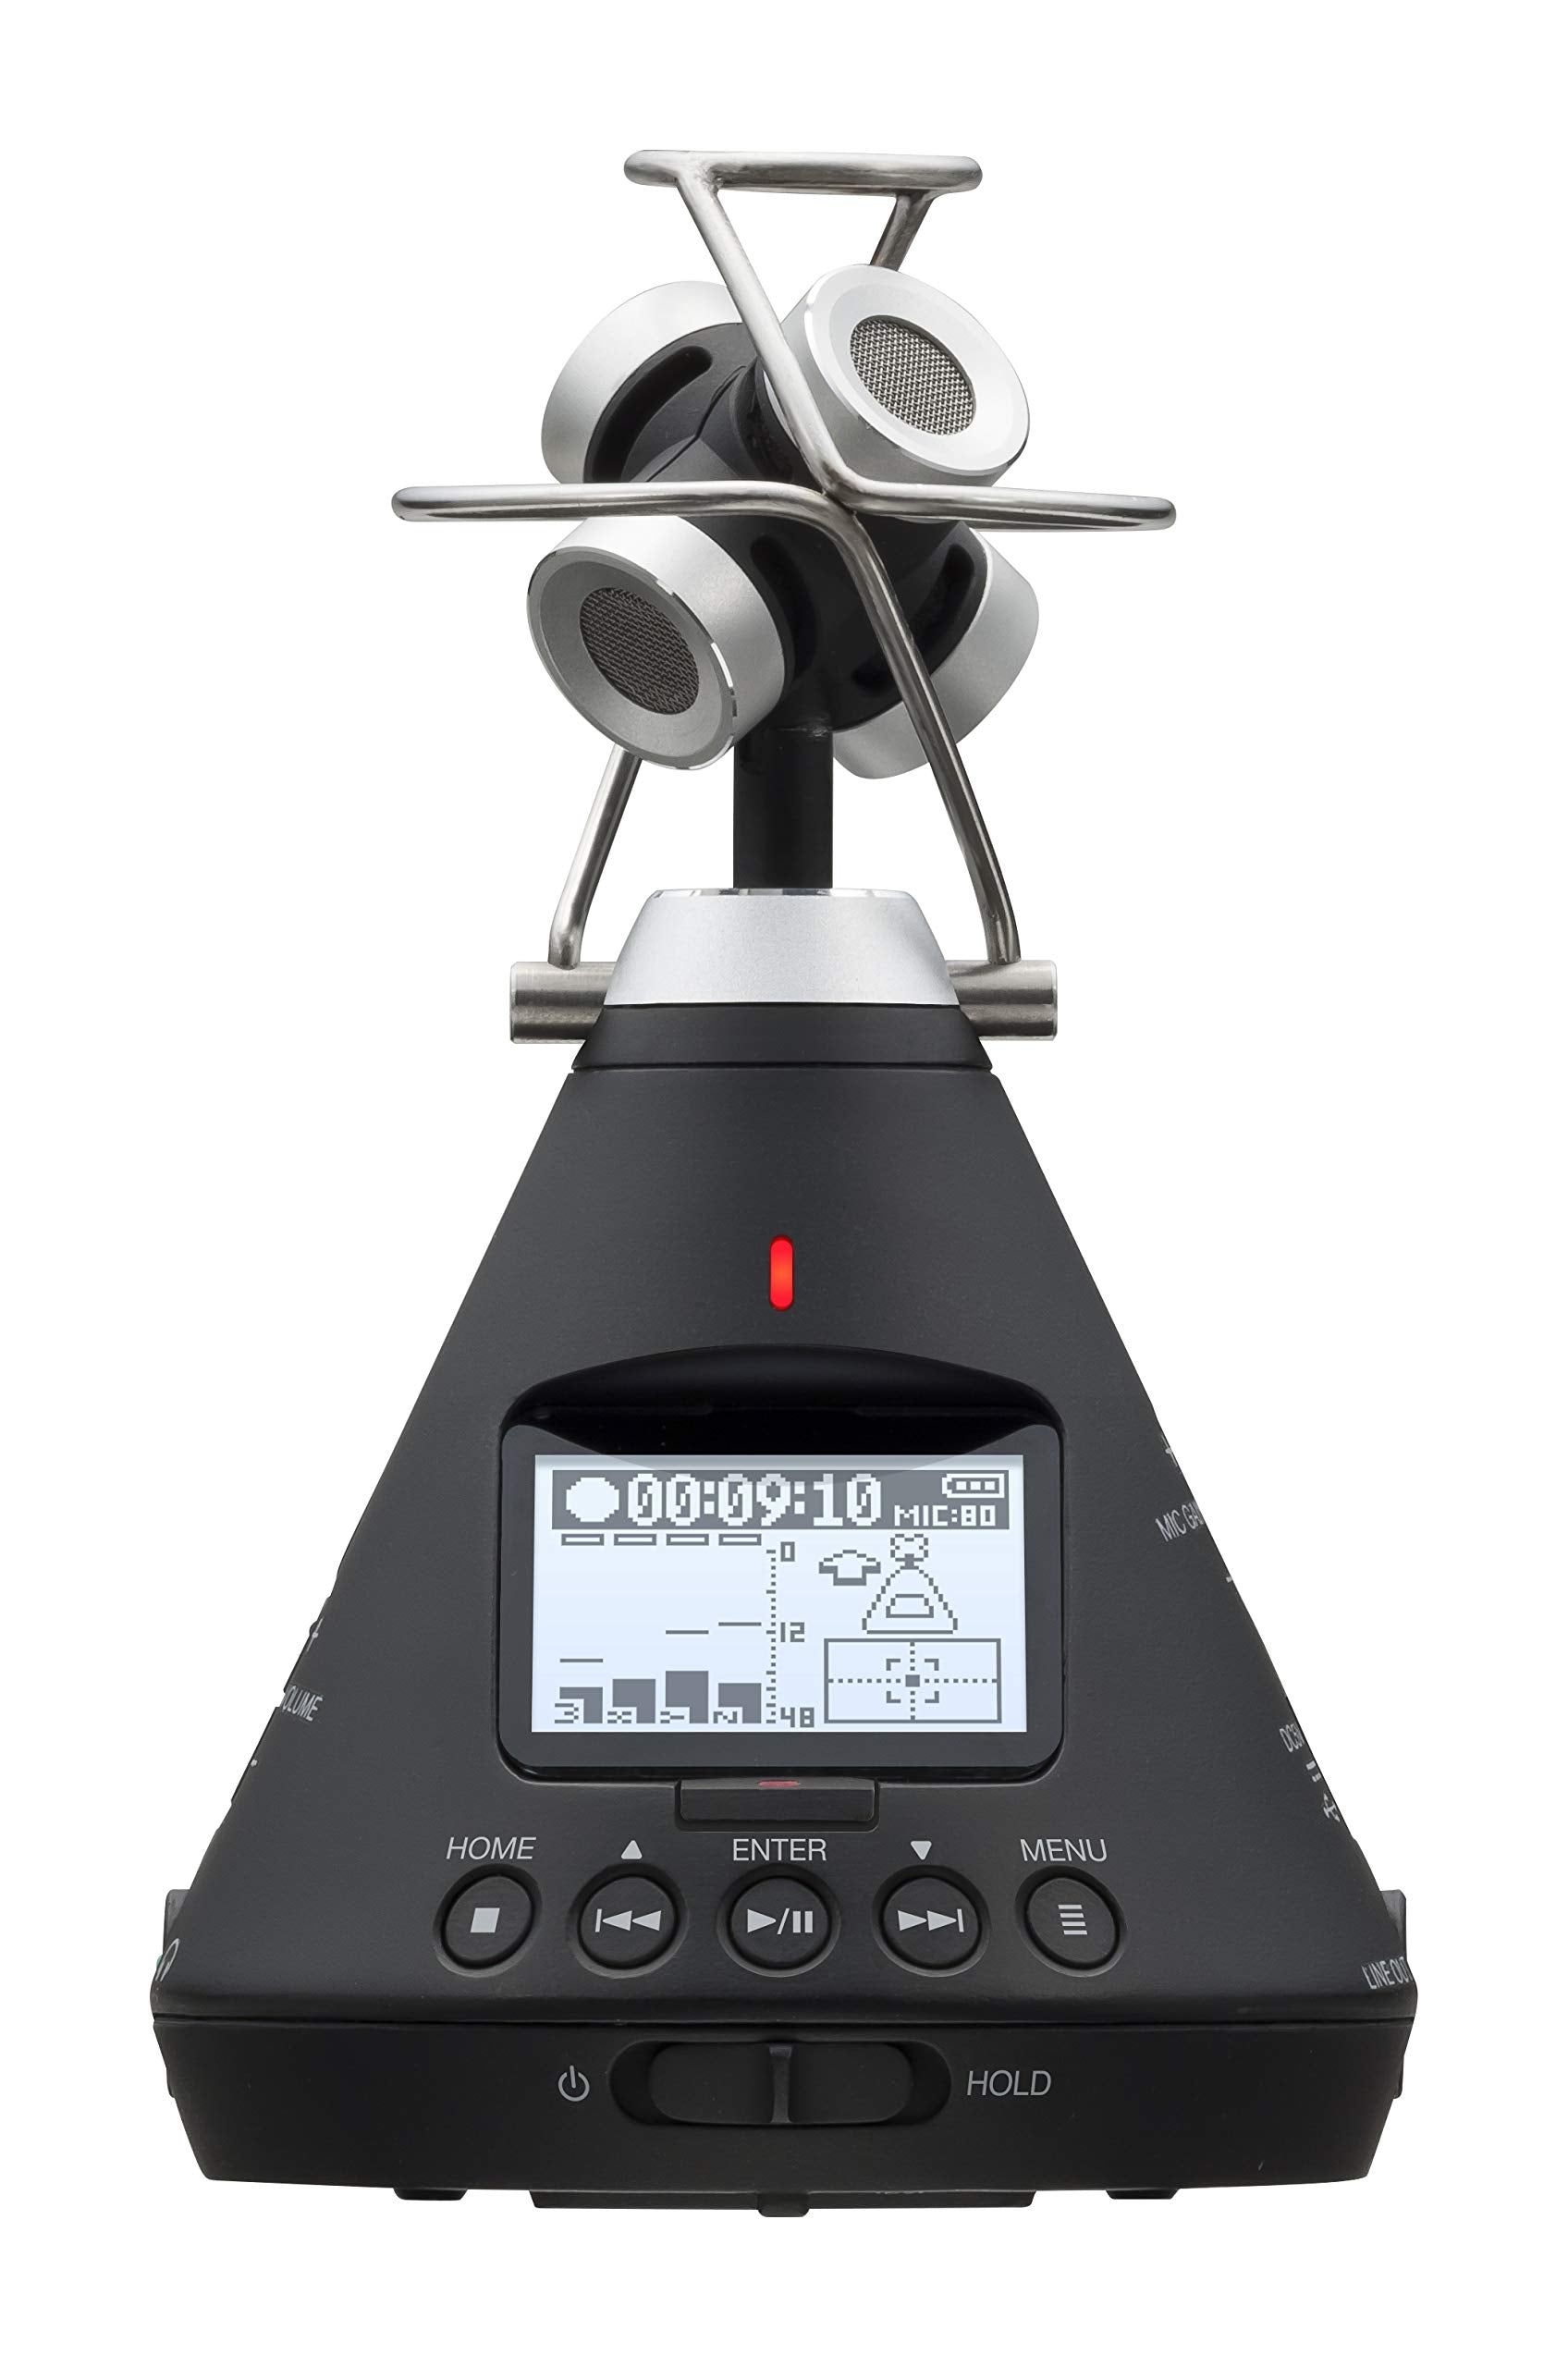 Zoom H3-VR 360° Audio Recorder, Records Ambisonics, Binaural, and Stereo, Battery Powered, Records to SD Card, Wireless Control, for VR & Surround Sound Video, Music, and Streaming